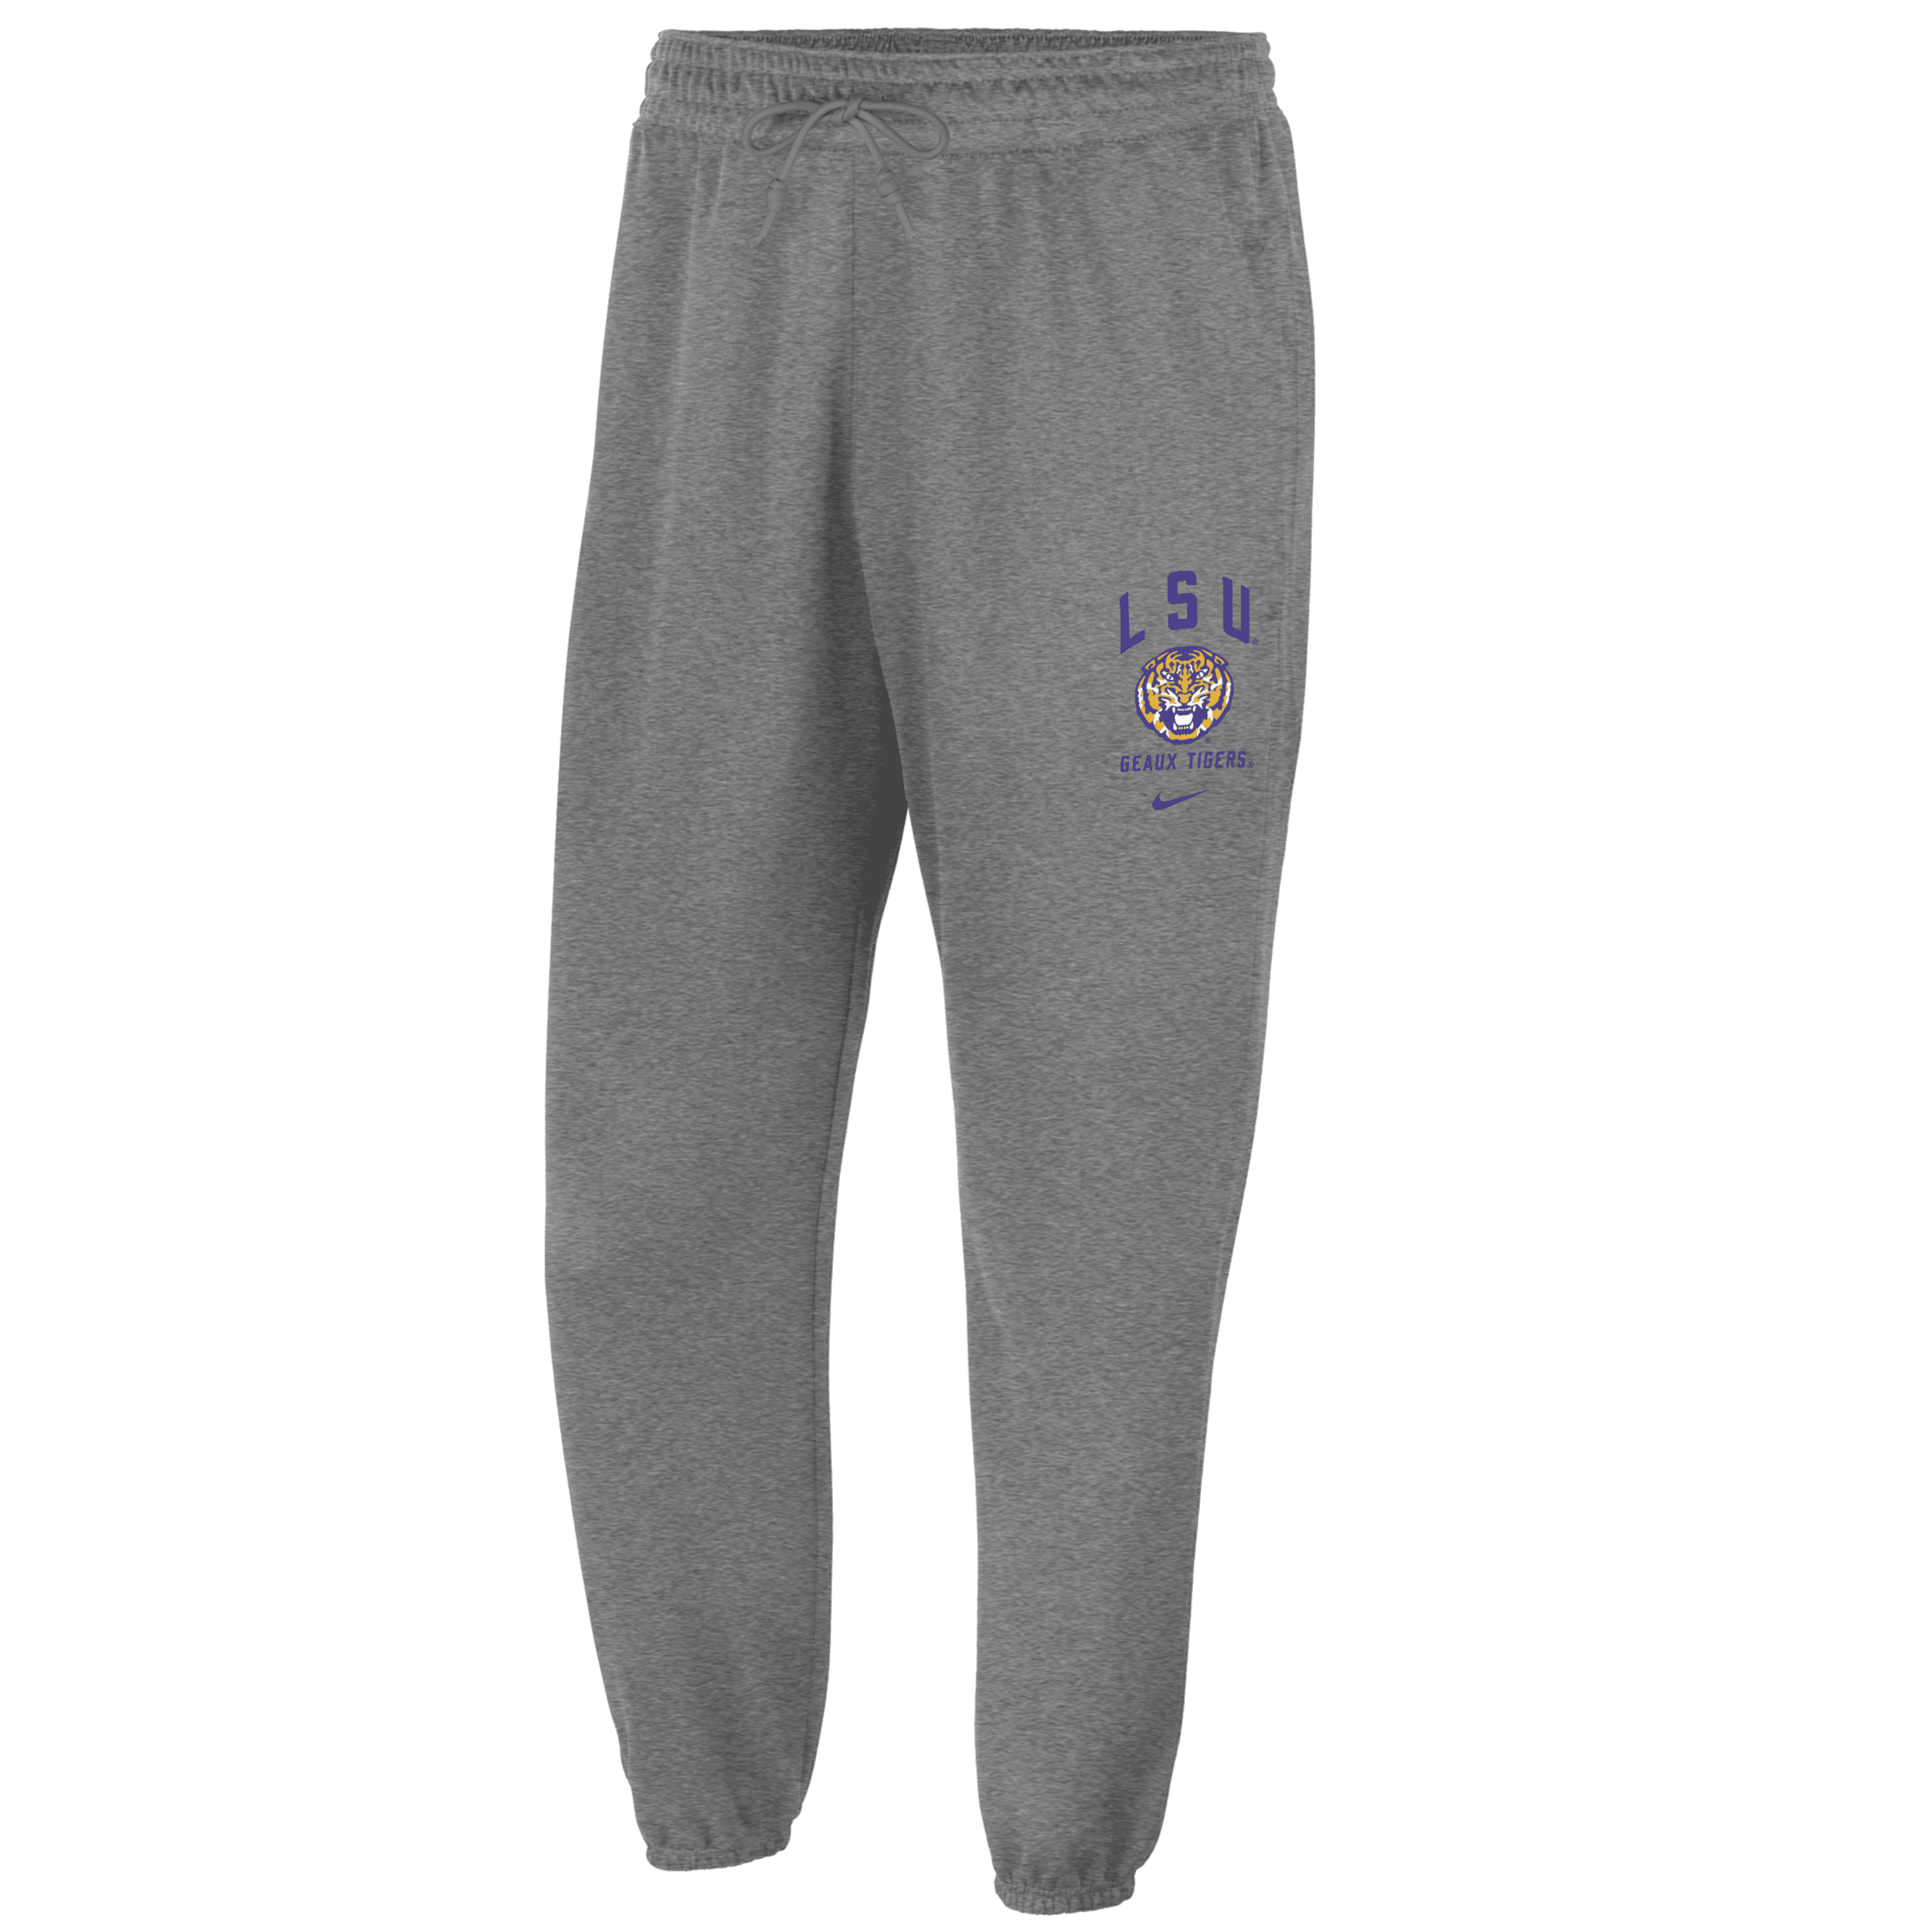 Nike Lsu Standard Issue  Men's College Jogger Pants In Grey